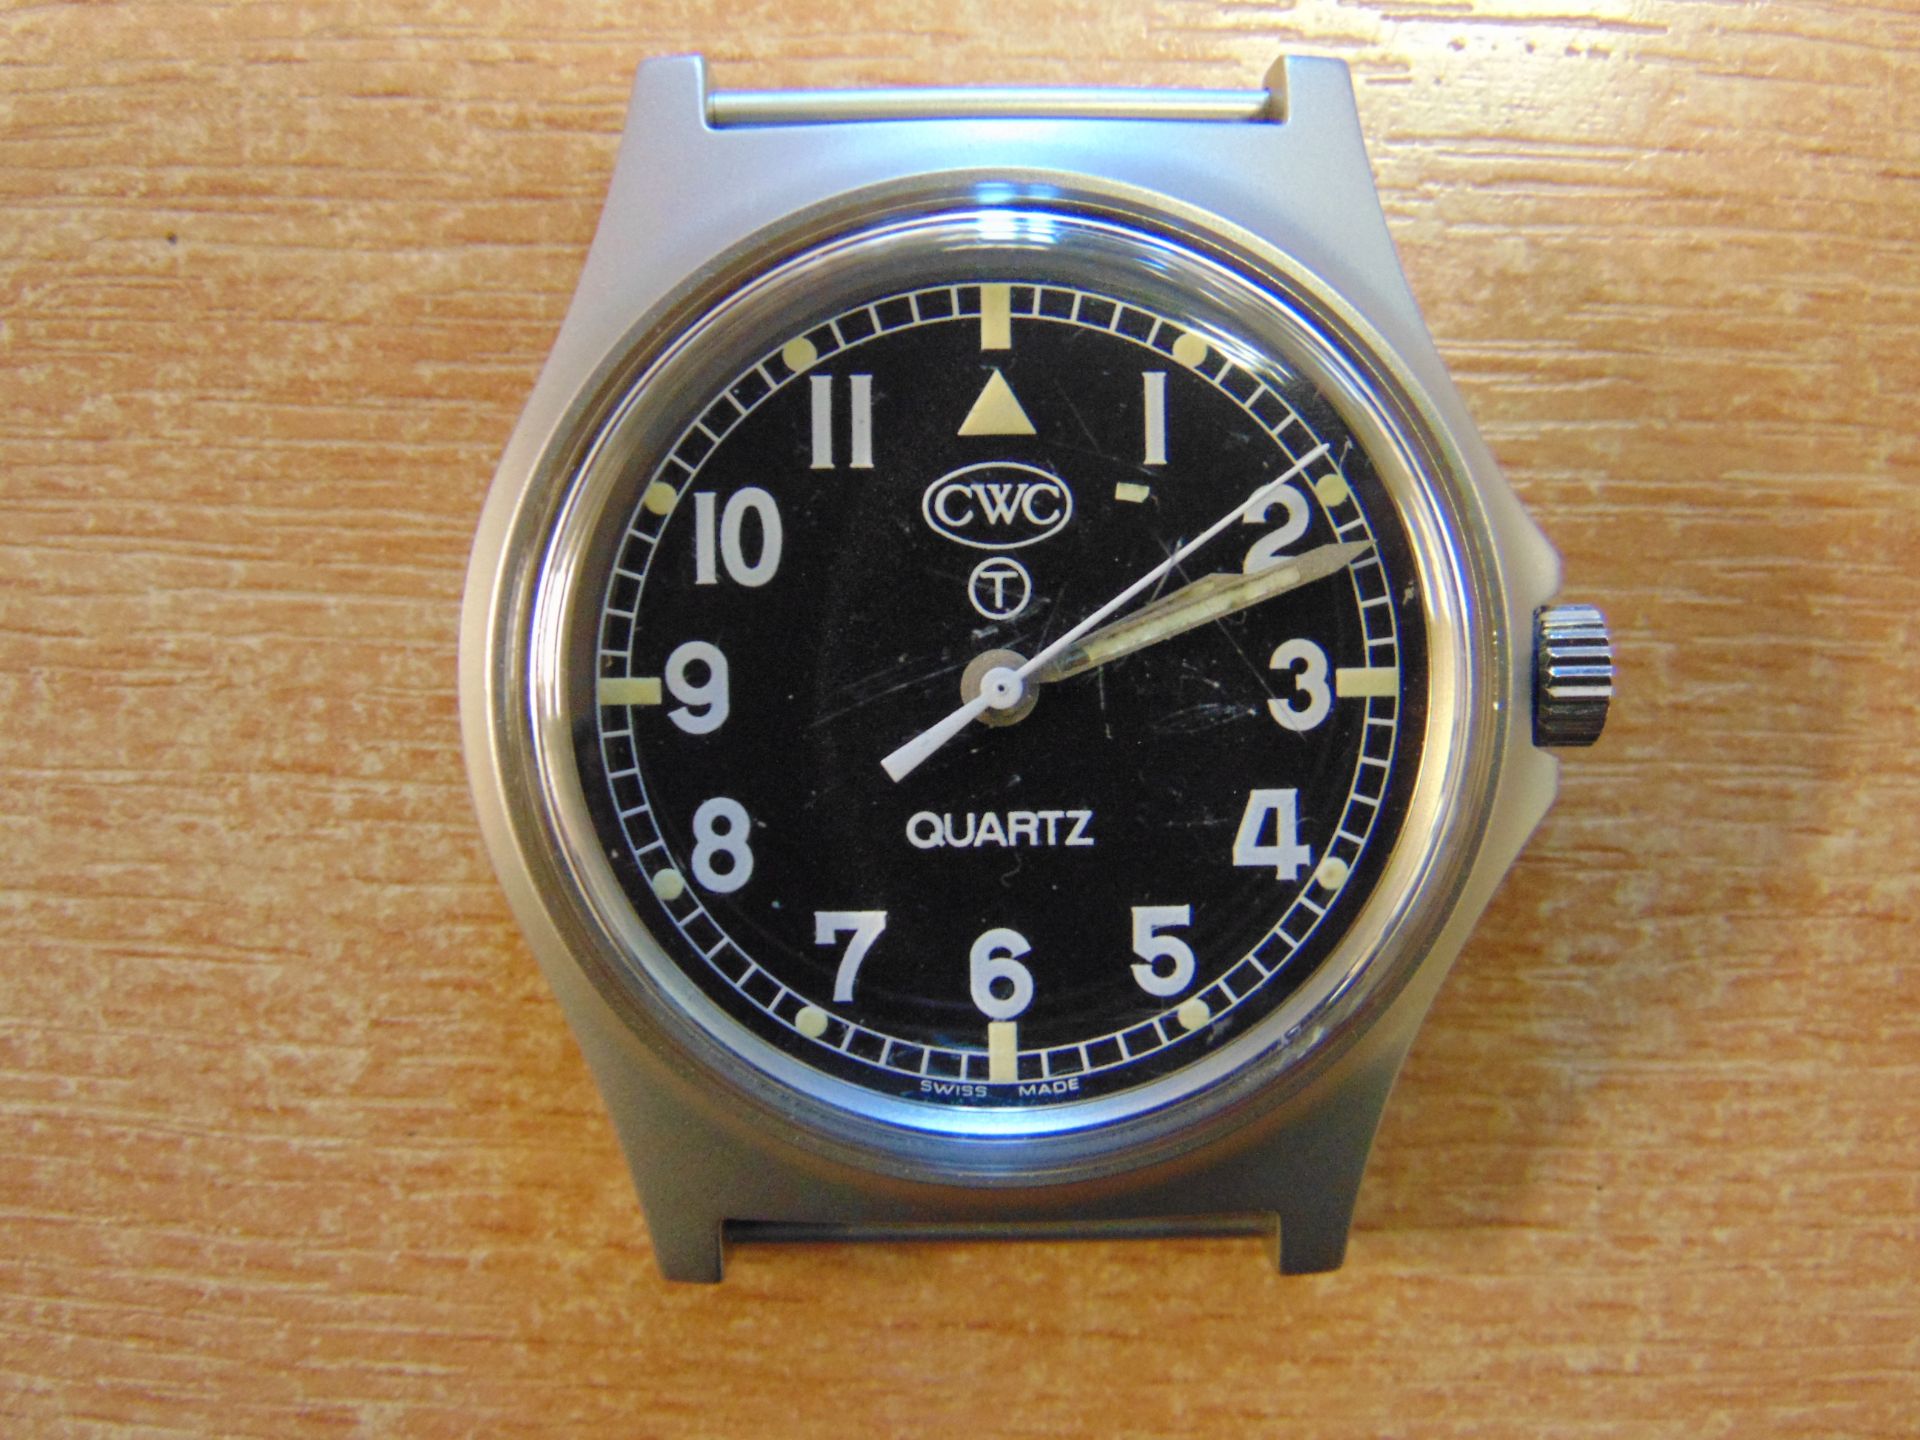 CWC W 10 SERVICE WATCH WATER RESISTANT NATO MARKED DATED 2004 - UNISSUED - Image 3 of 11